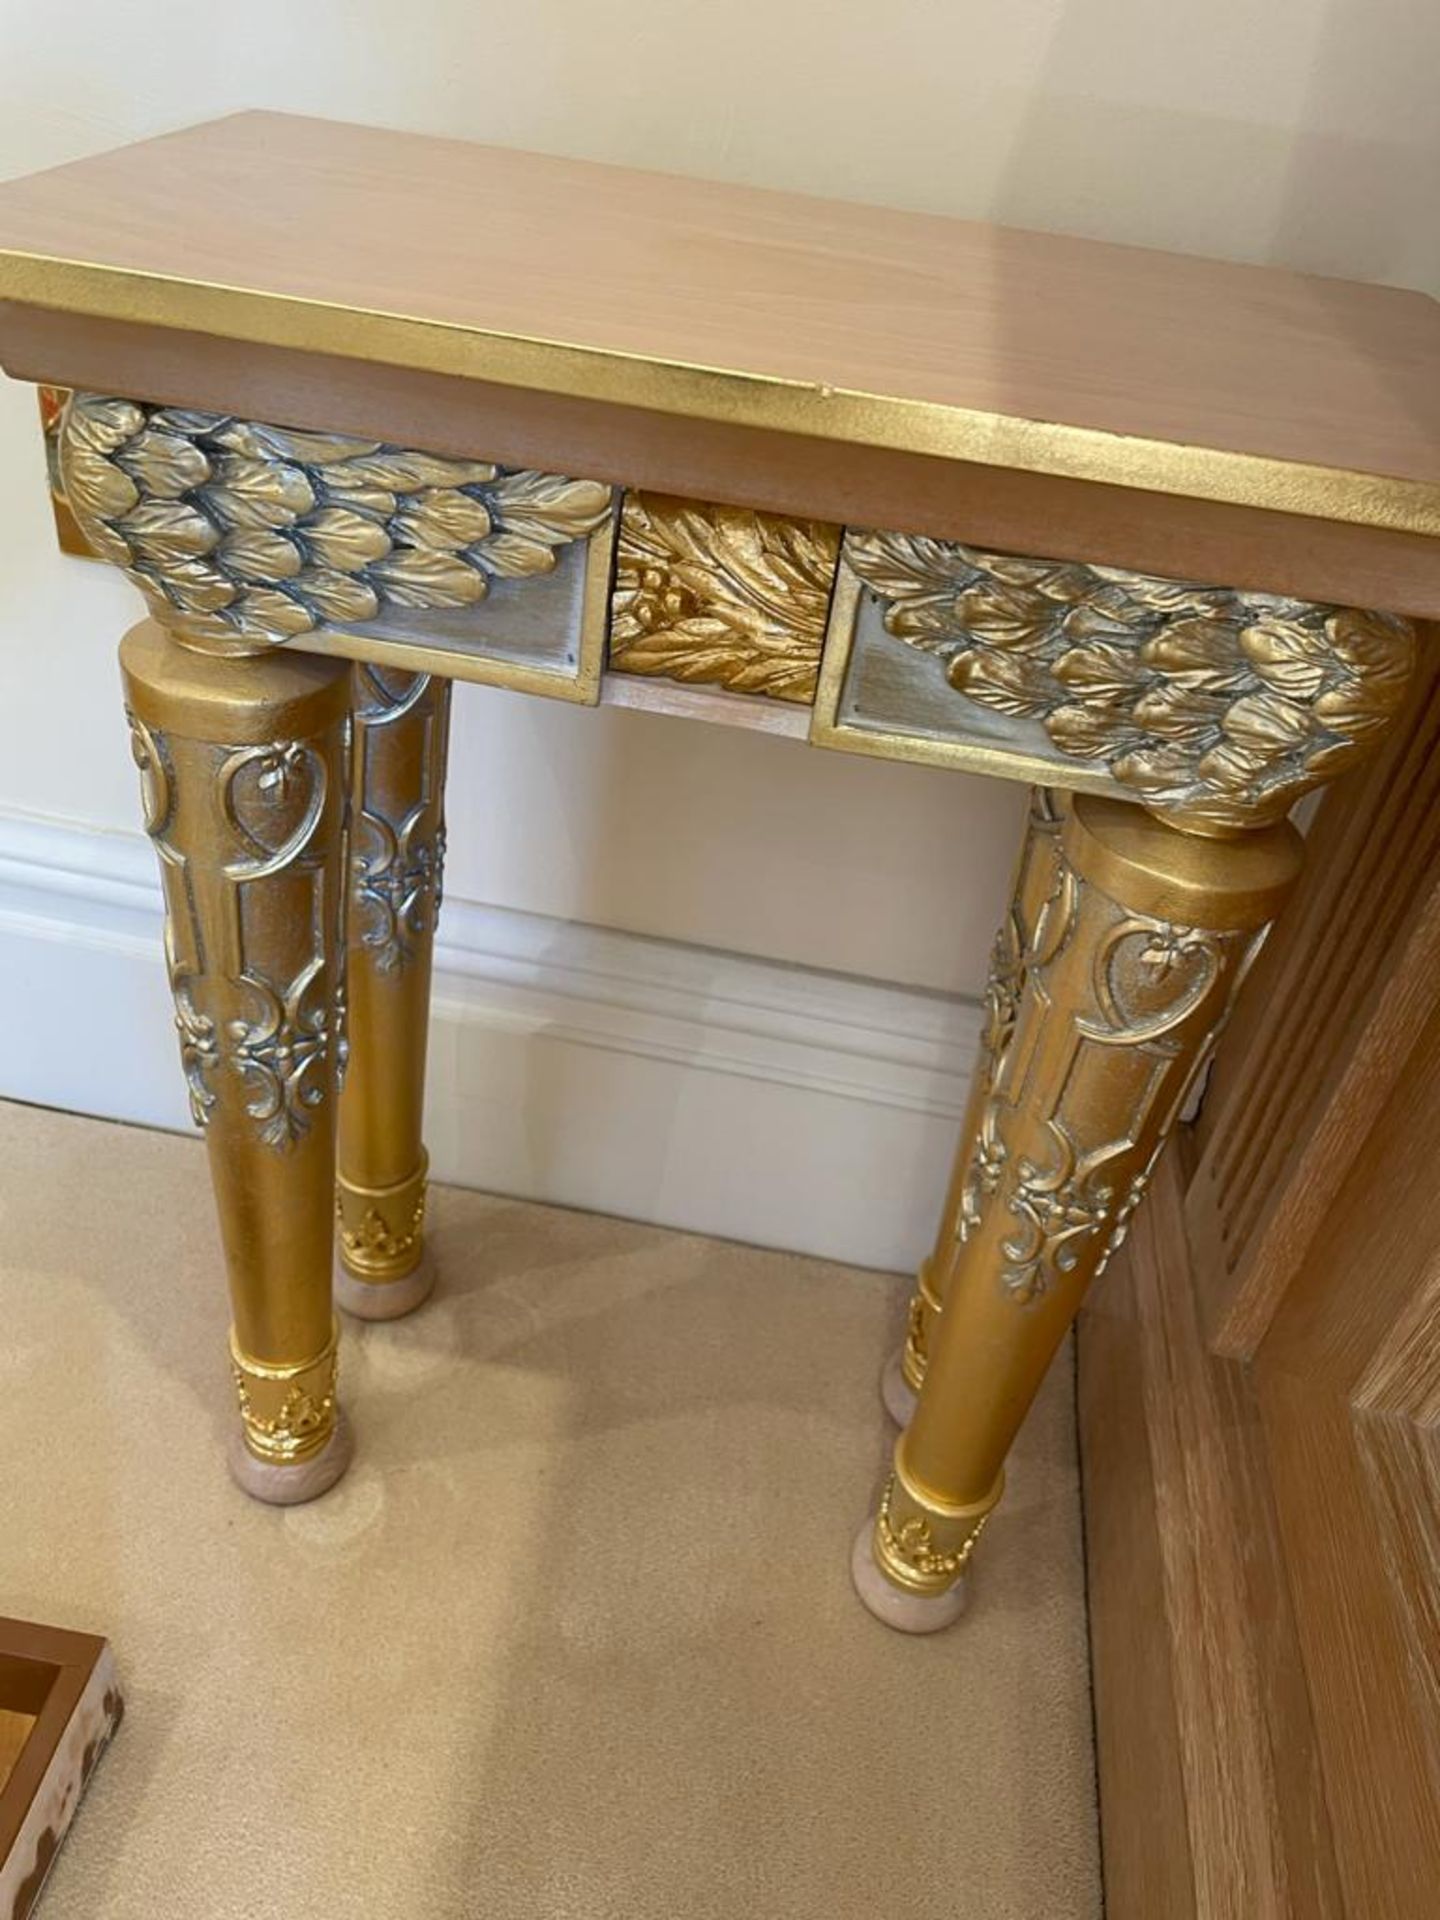 1 x Hand Carved Ornate Lamp Tables Complimented With Birchwood Veneer, Golden Pillar Legs, Carved - Image 3 of 10